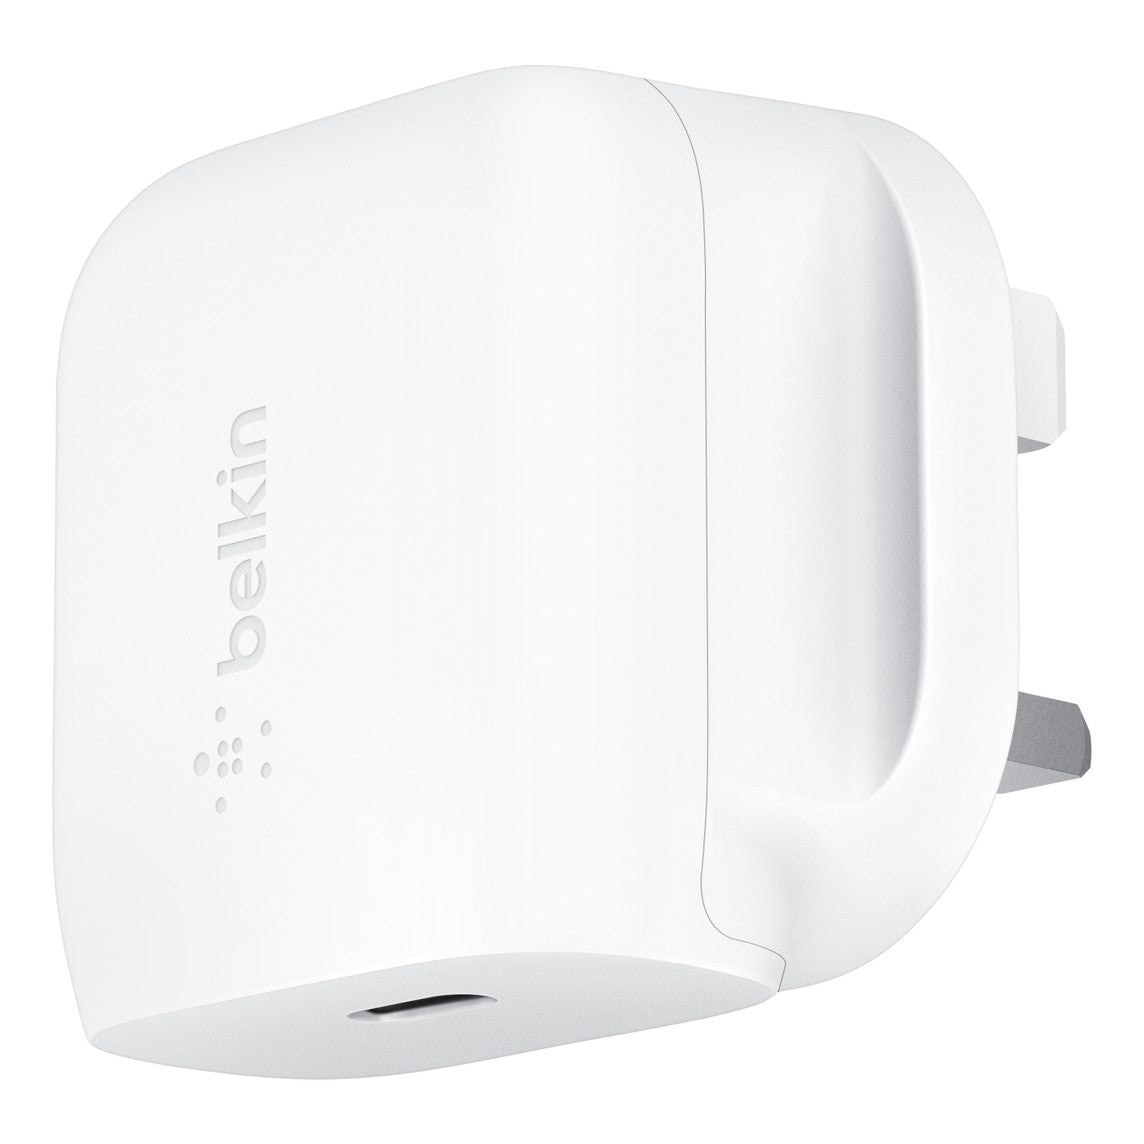 Belkin USB-C Wall Charger 20W - White